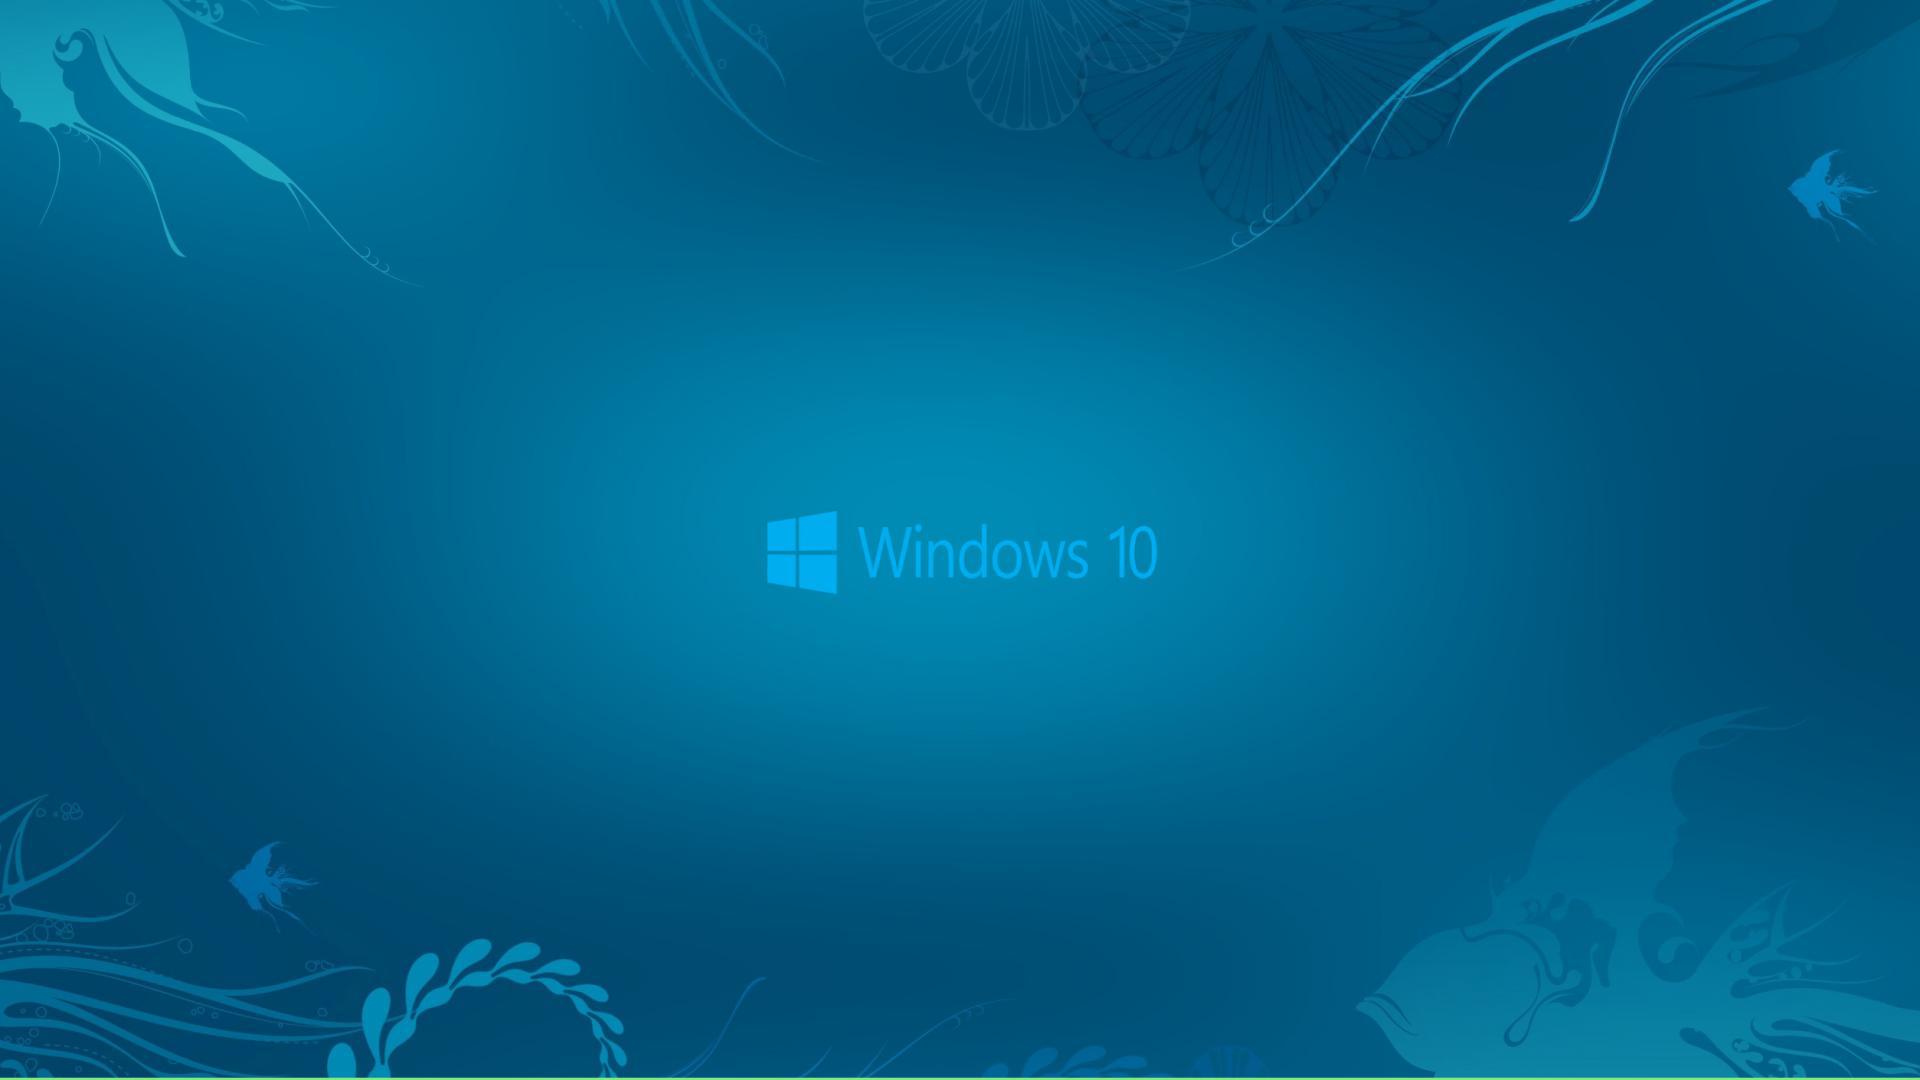 Windows Wallpaper And Image Pictures Photos